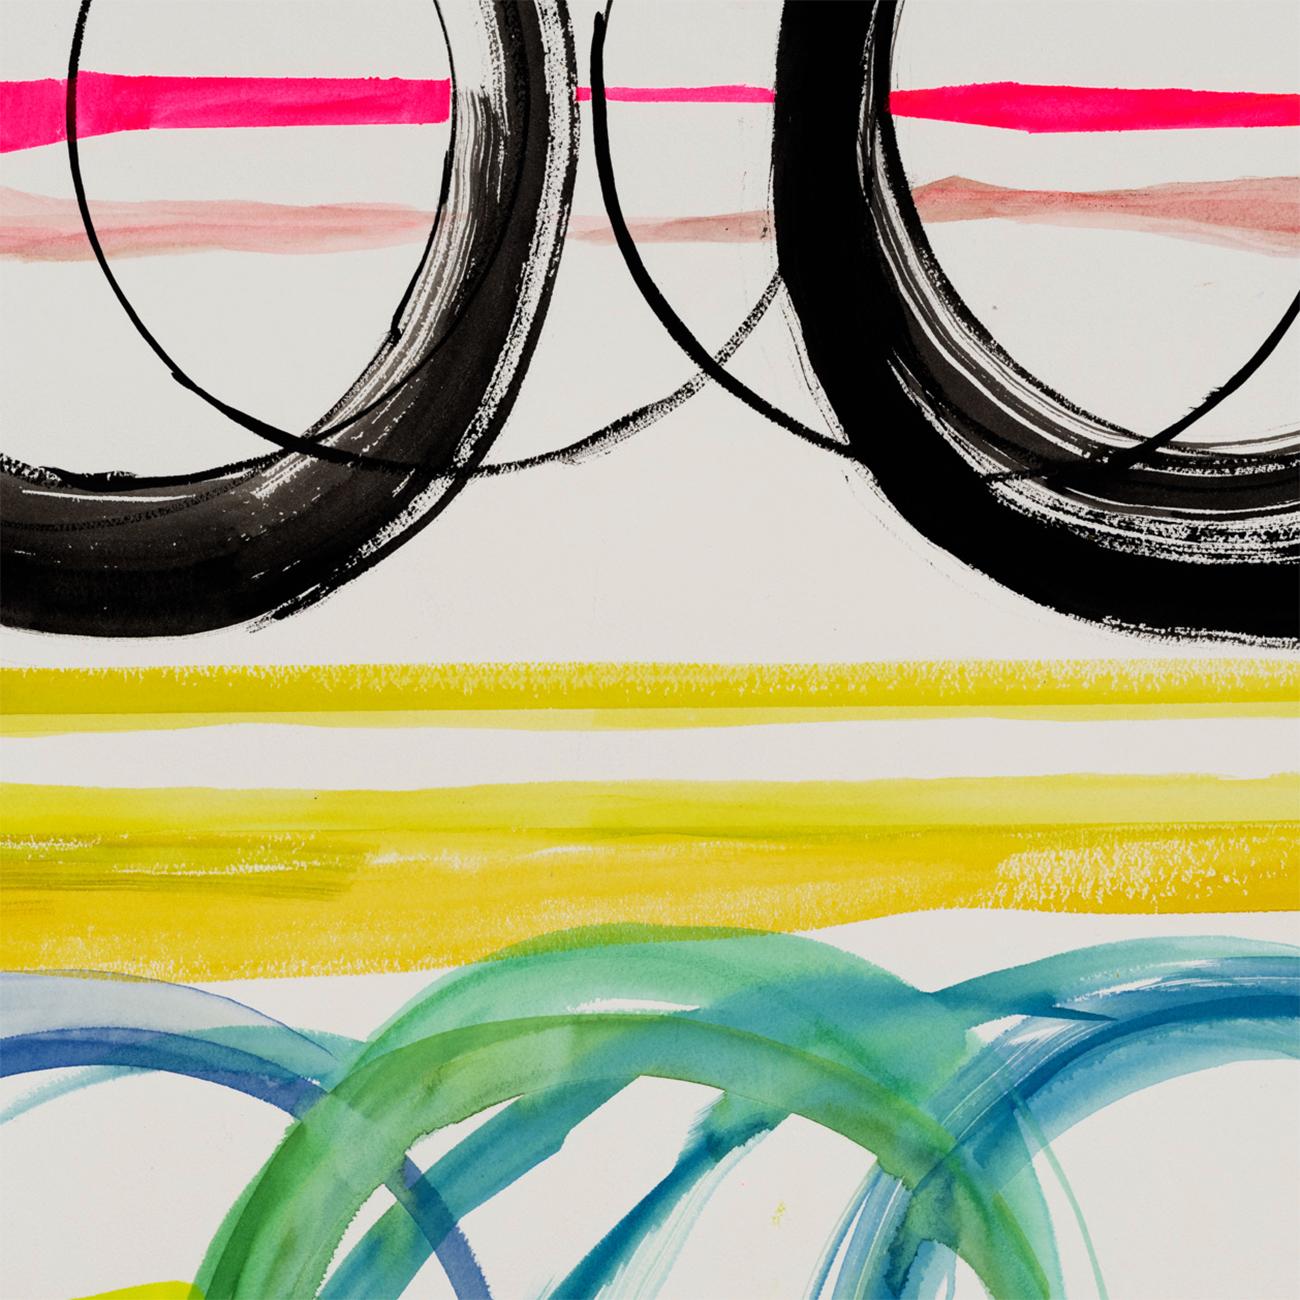 Circles And Lines (Abstract painting)
Acrylic and Ink on Arches Paper — Unframed.

Laura Newman's paintings combine geometric delineations of space, ephemeral color fields, dynamic lines and organic forms, resulting in atmospheric images evocative